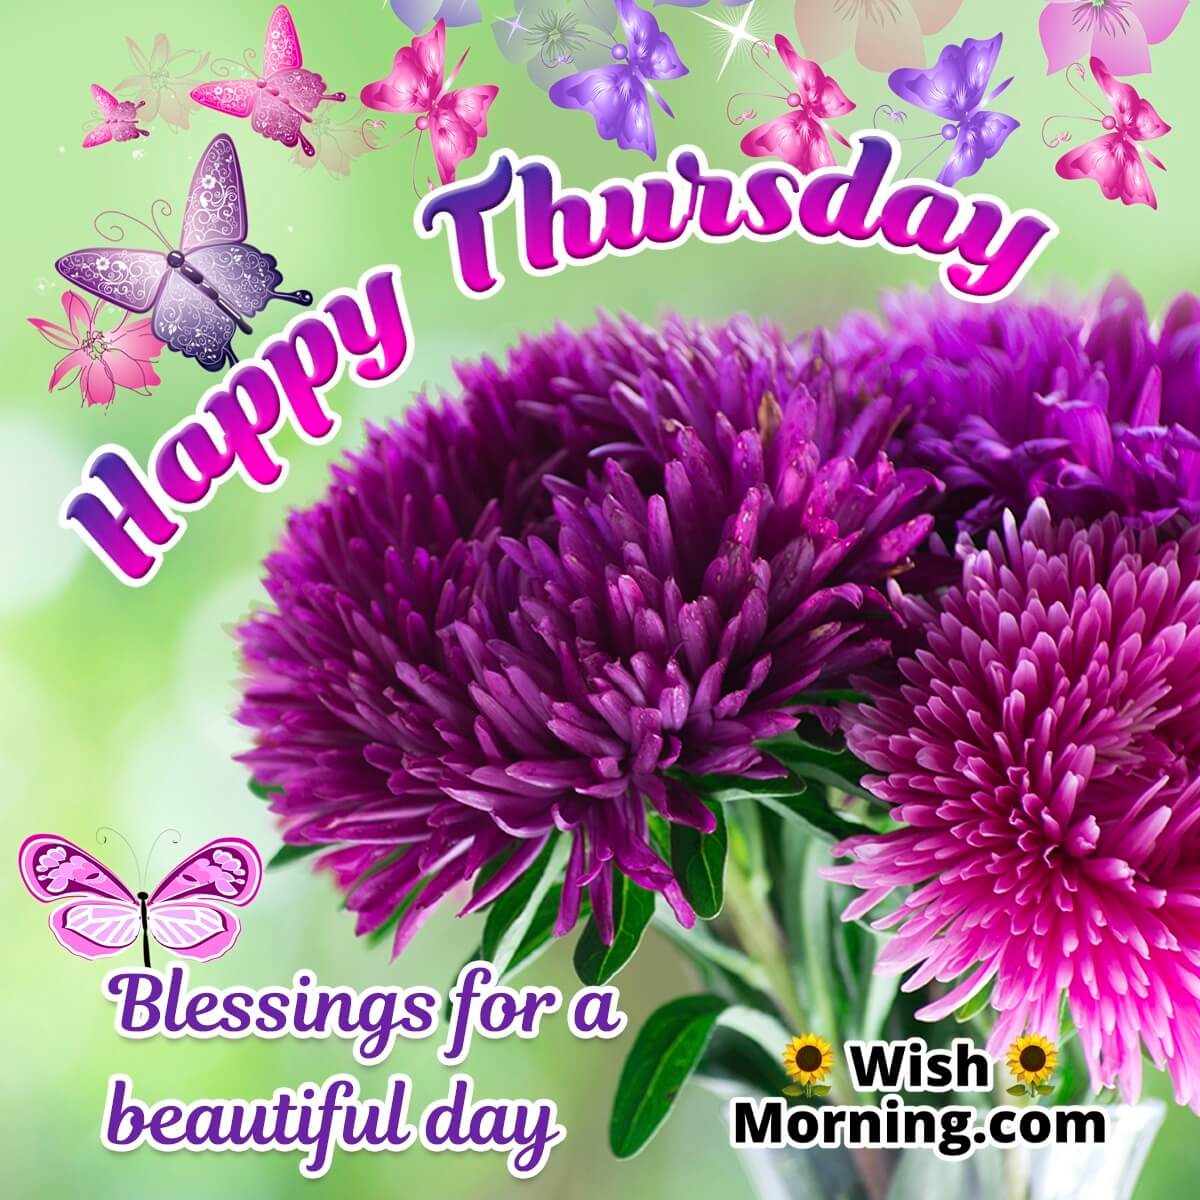 Happy Thurday Blessings For A Beautiful Day